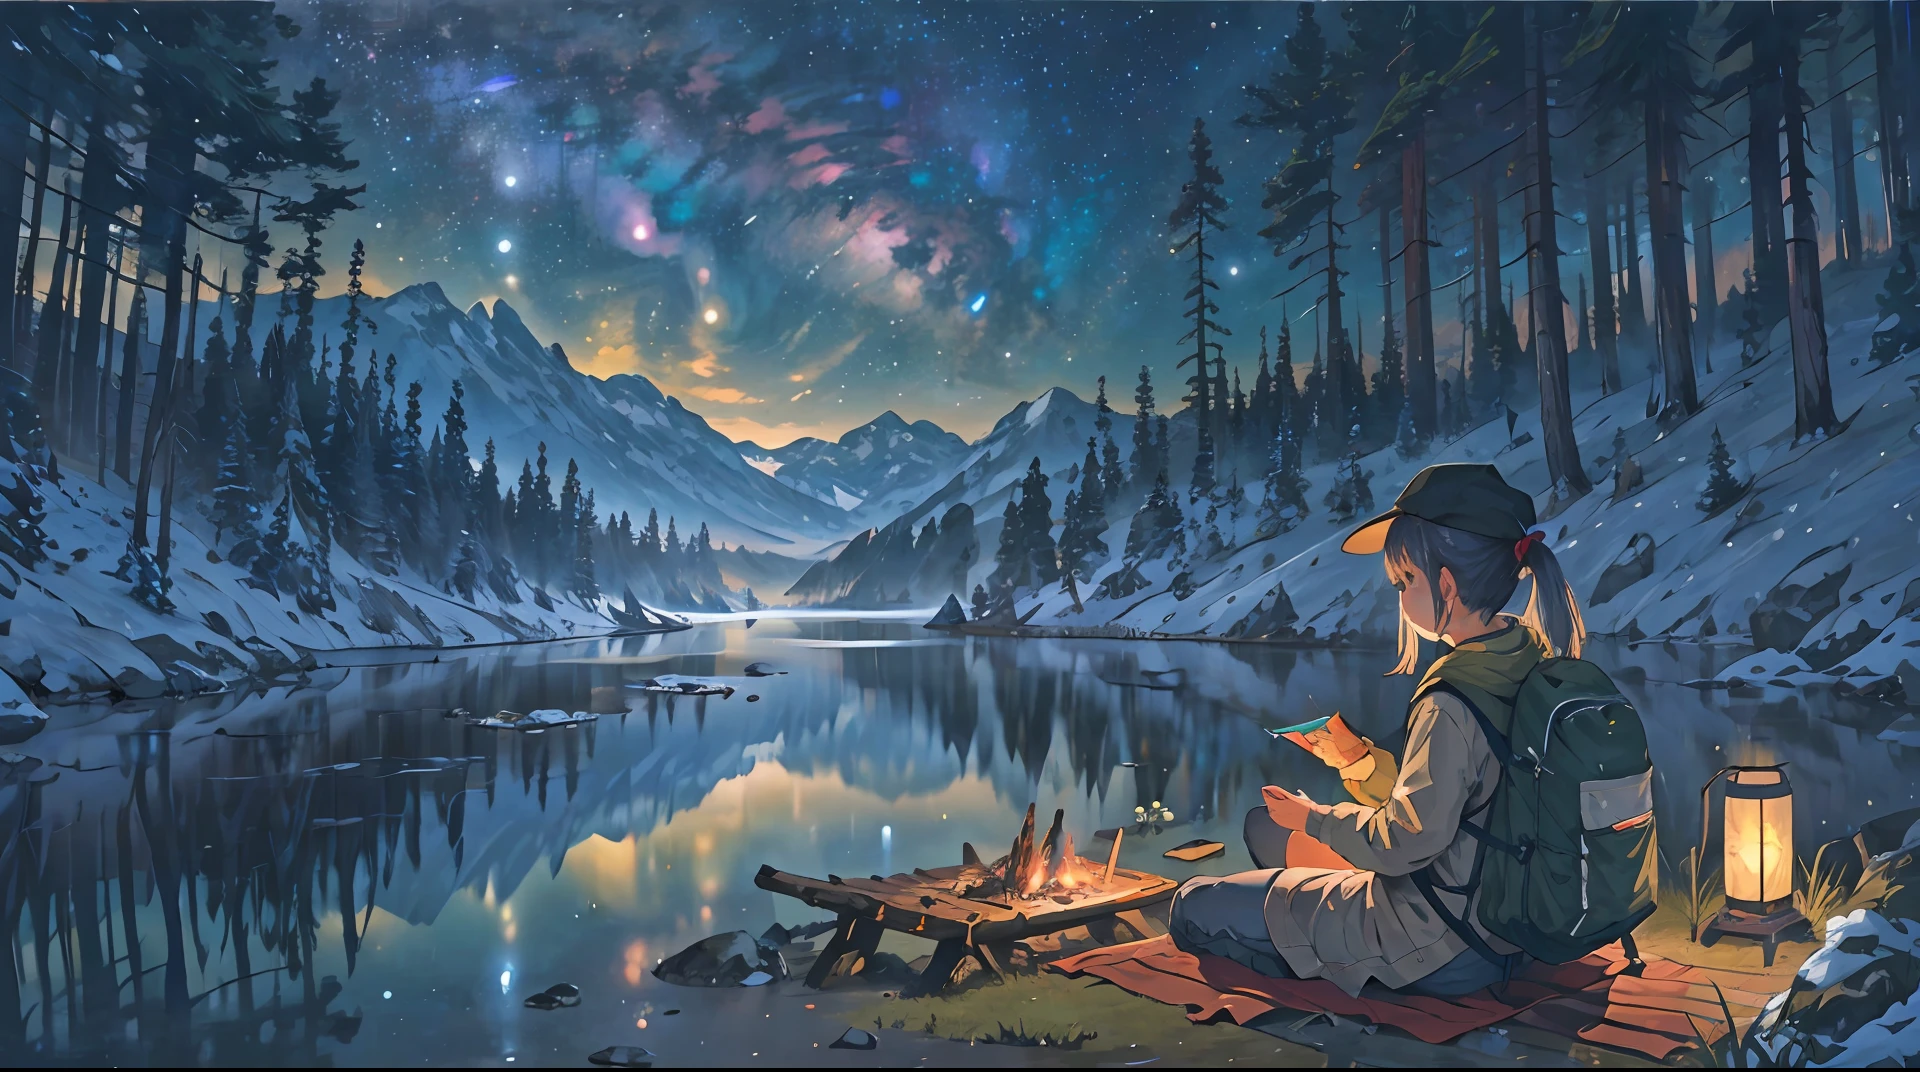 masterpiece, best quality, ultra-detailed, illustration, 1girl, short girl, young girl, beautiful, solo, looking away, outdoors, camping, night, mountains, nature, stars, moon, tent, twin ponytails, green eyes, cheerful, happy, backpack, sleeping bag, camping stove, water bottle, mountain boots, gloves, sweater, hat, flashlight, forest, rocks, river, wood, smoke, shadows, contrast, clear sky, constellations, Milky Way, peaceful, serene, quiet, tranquil, remote, secluded, adventurous, exploration, escape, independence, survival, resourcefulness, challenge, perseverance, stamina, endurance, observation, intuition, adaptability, creativity, imagination, artistry, inspiration, beauty, awe, wonder, gratitude, appreciation, relaxation, enjoyment, rejuvenation, mindfulness, awareness, connection, harmony, balance, texture, detail, realism, depth, perspective, composition, color, light, shadow, reflection, refraction, tone, contrast, foreground, middle ground, background, naturalistic, figurative, representational, impressionistic, expressionistic, abstract, innovative, experimental, unique, depth of field, bokeh